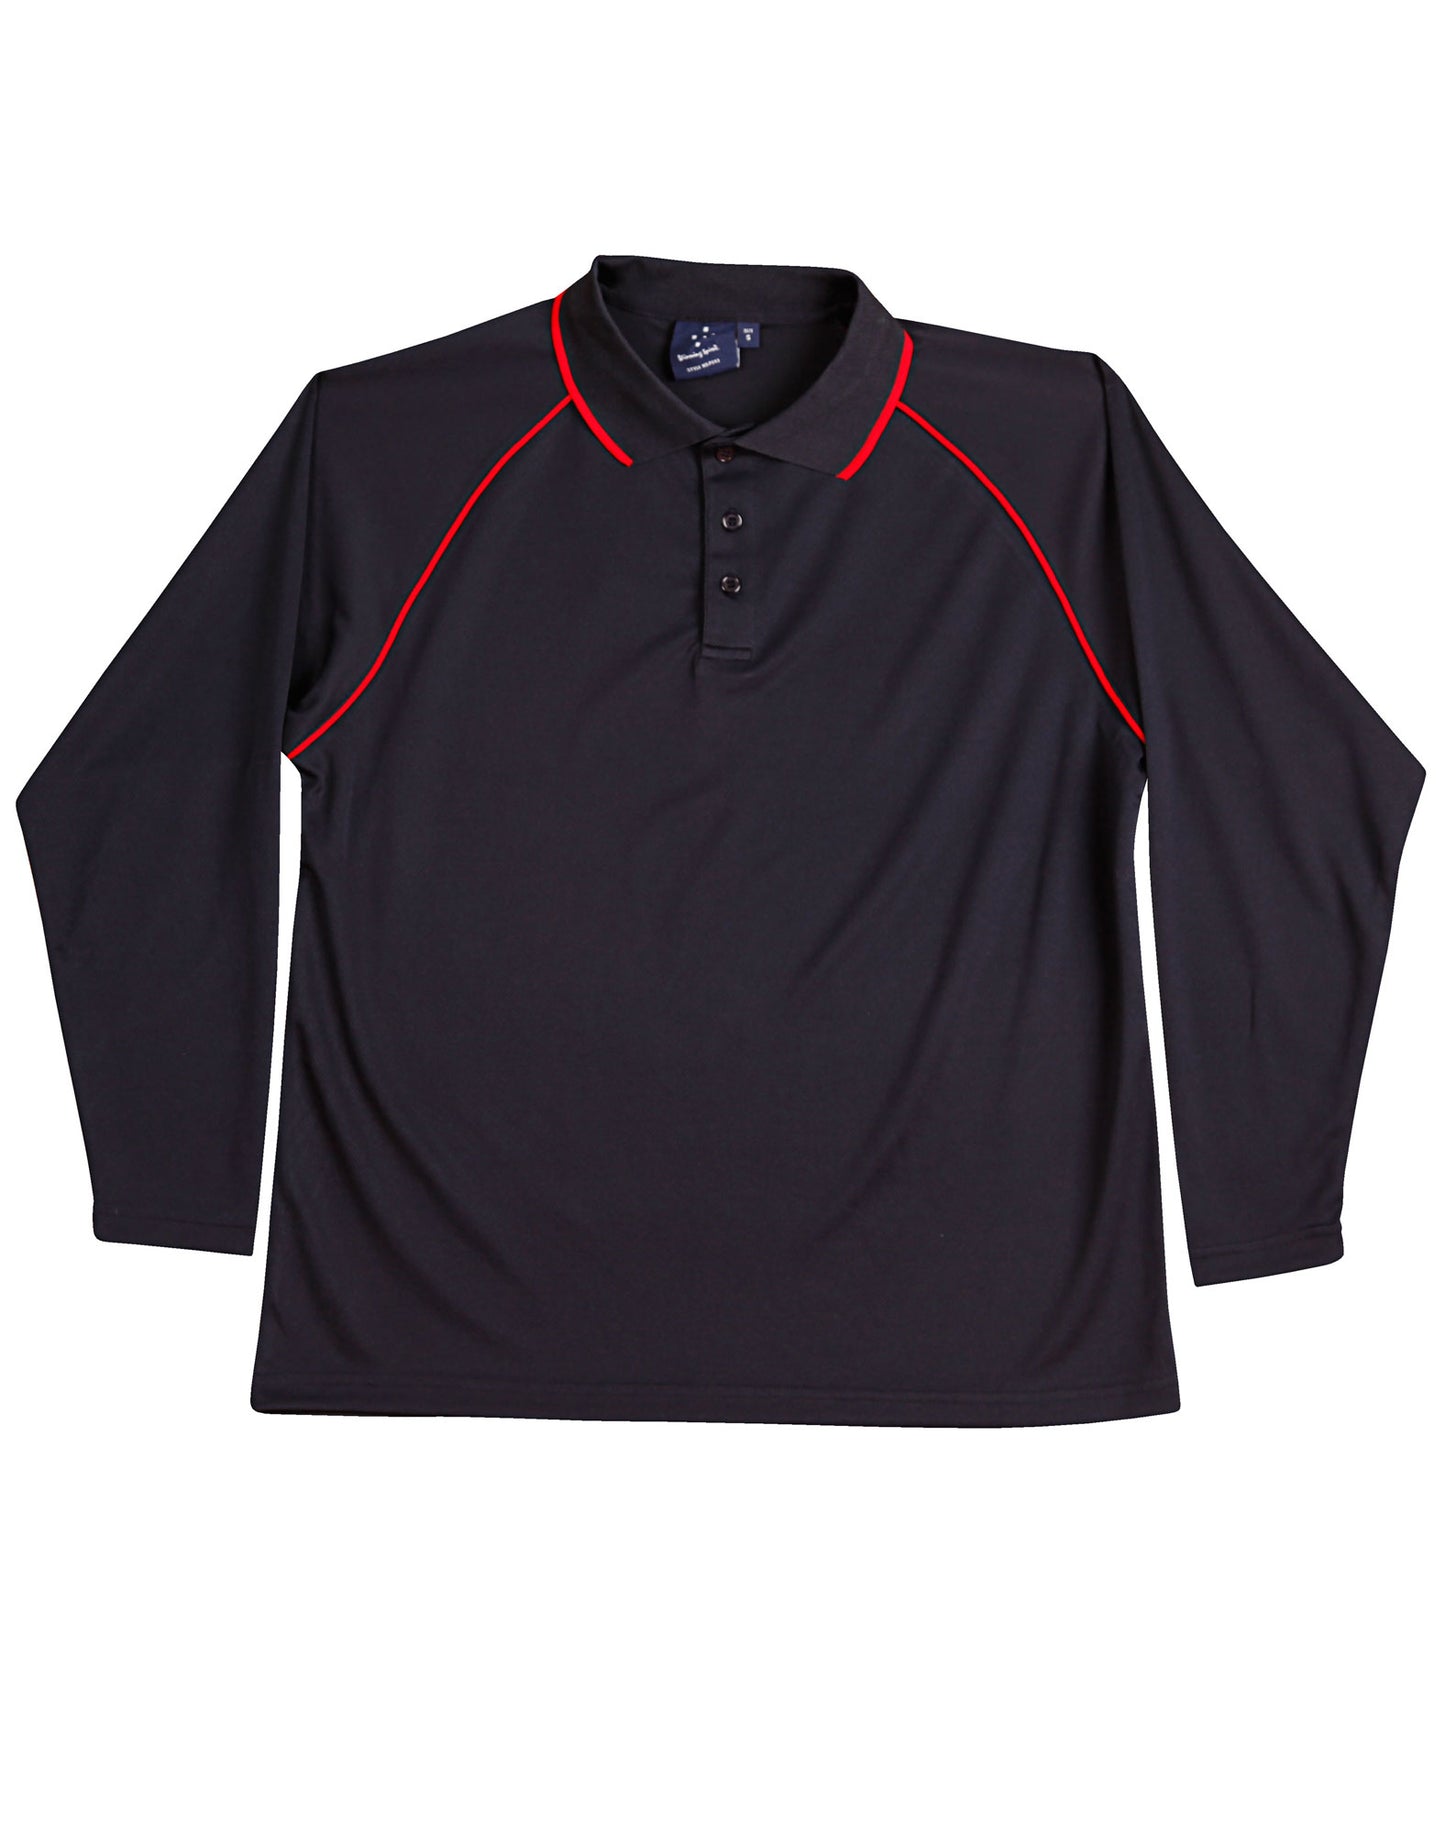 Long Sleeve Contrast Polo - made by AIW